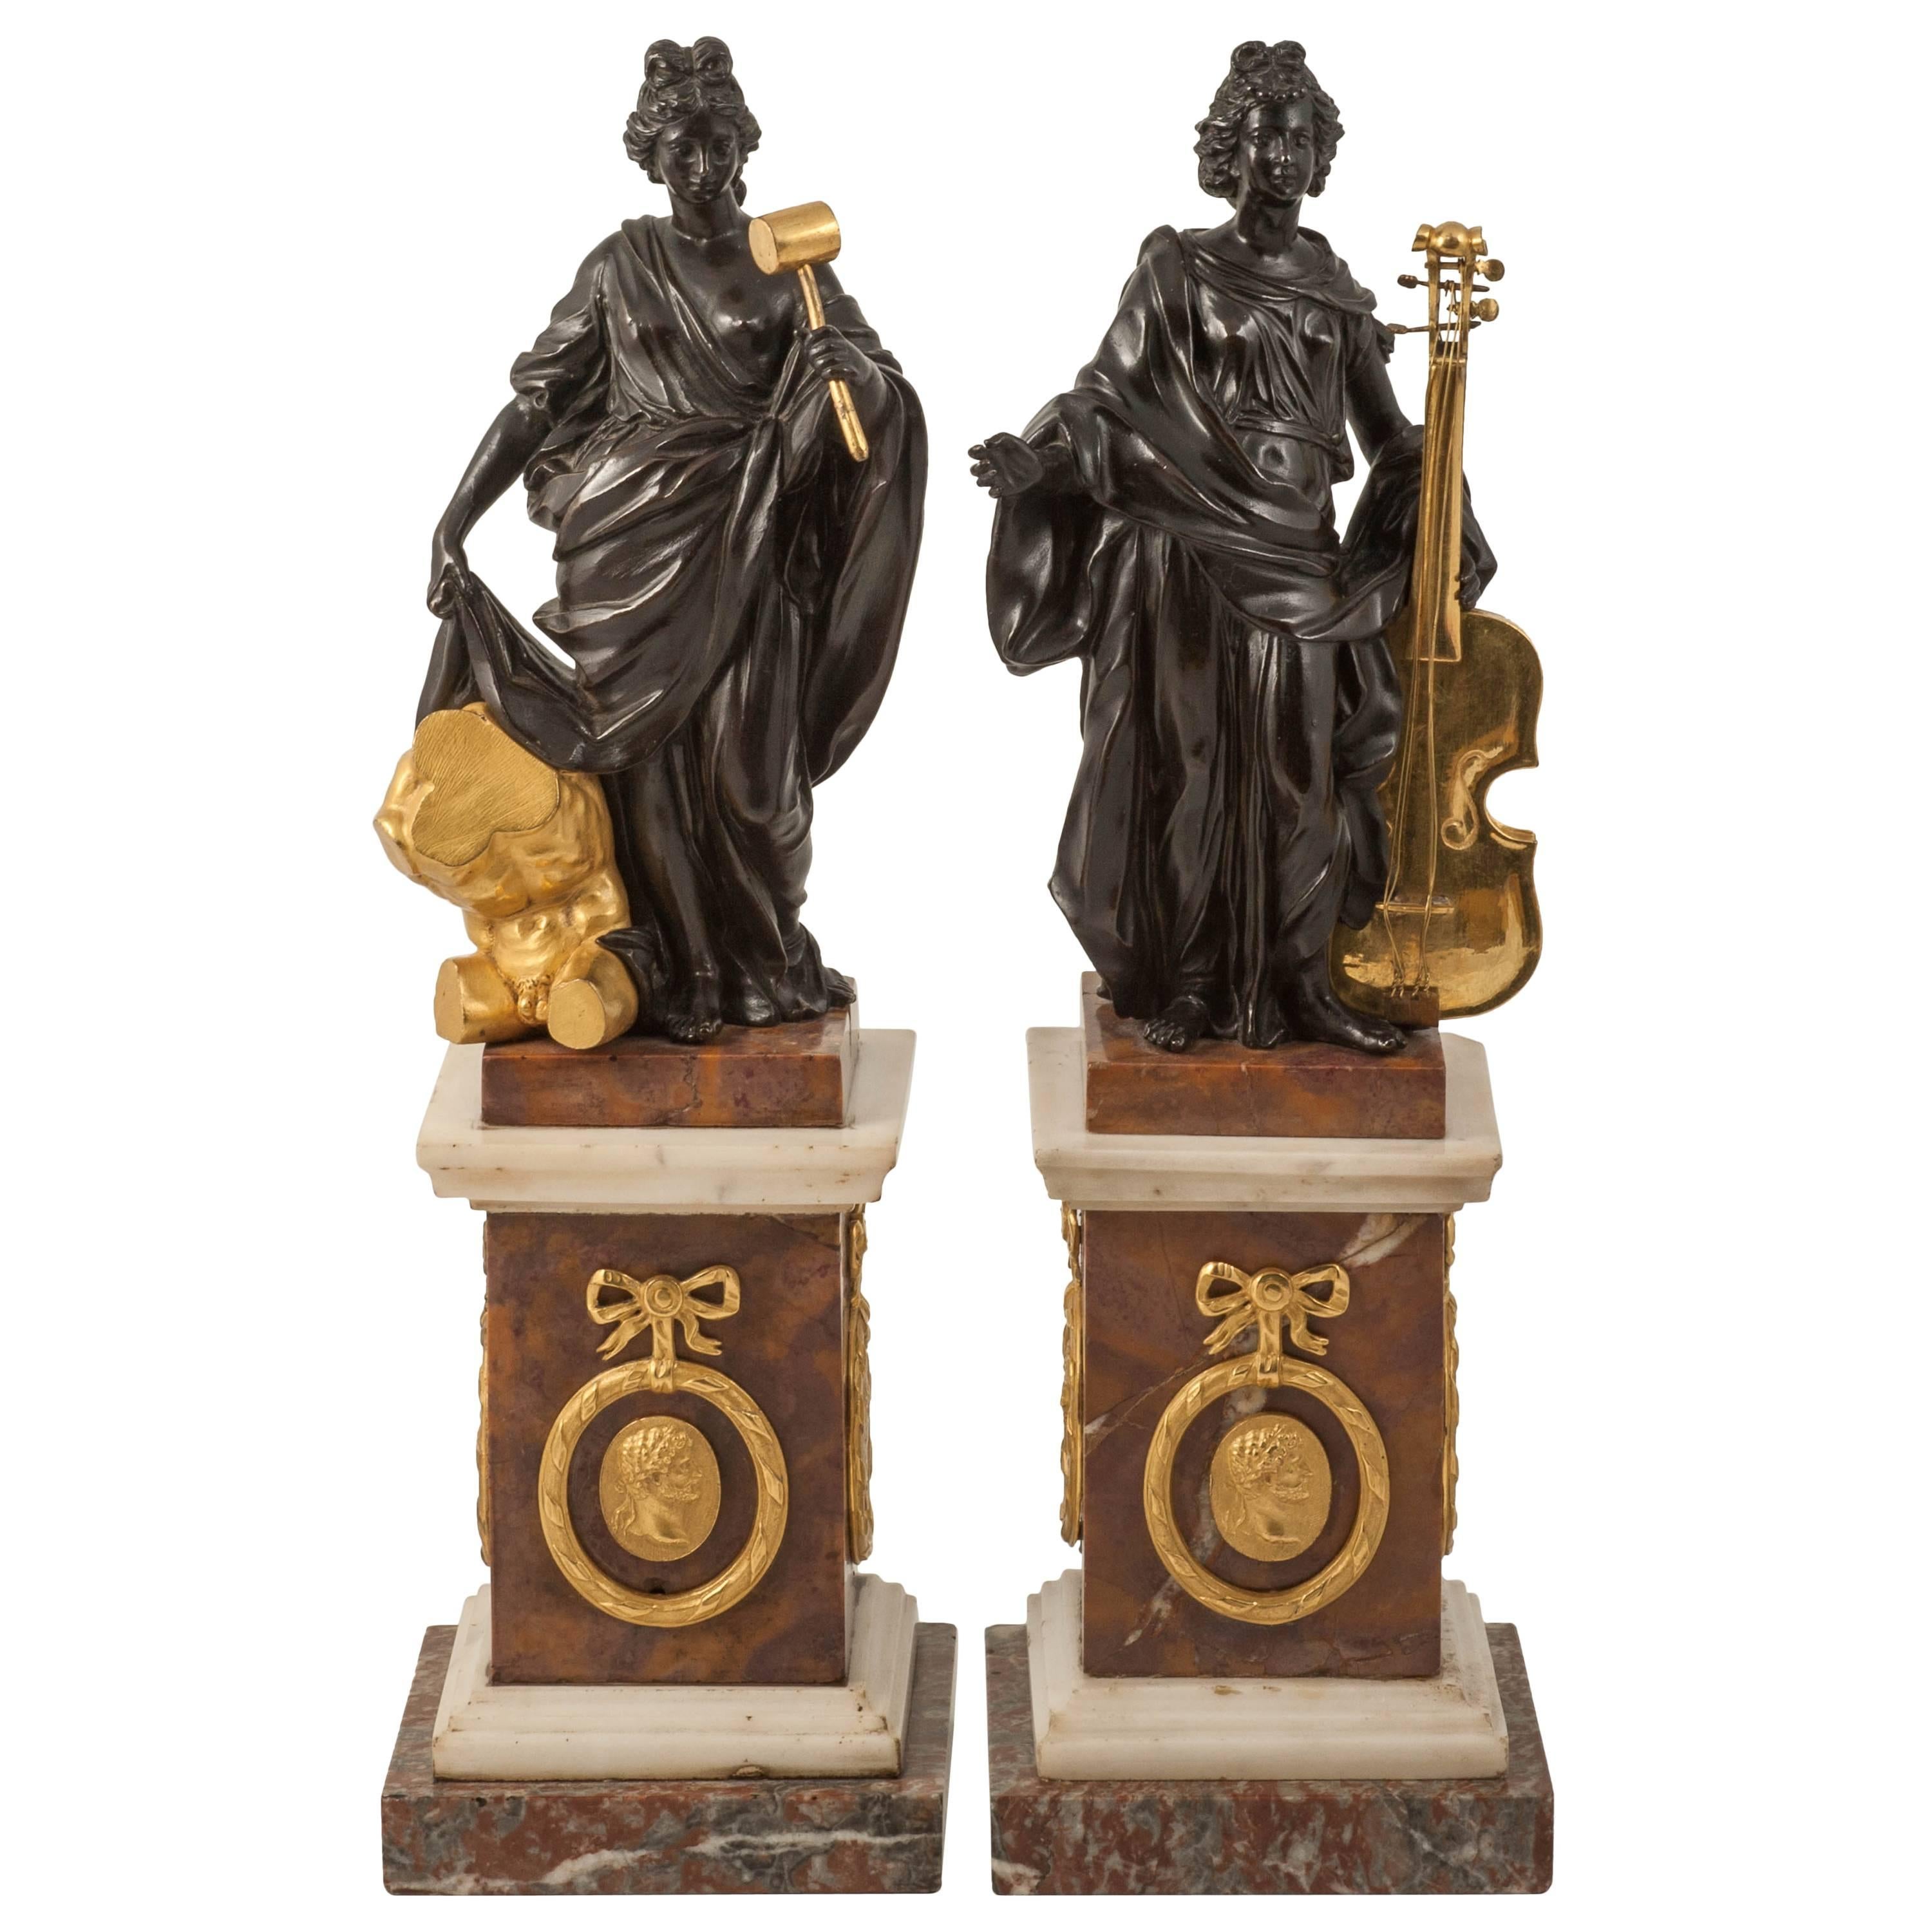 Rare Pair of Allegorical Bronze Figures Attributed to Valadier, Rome, circa 1780 For Sale